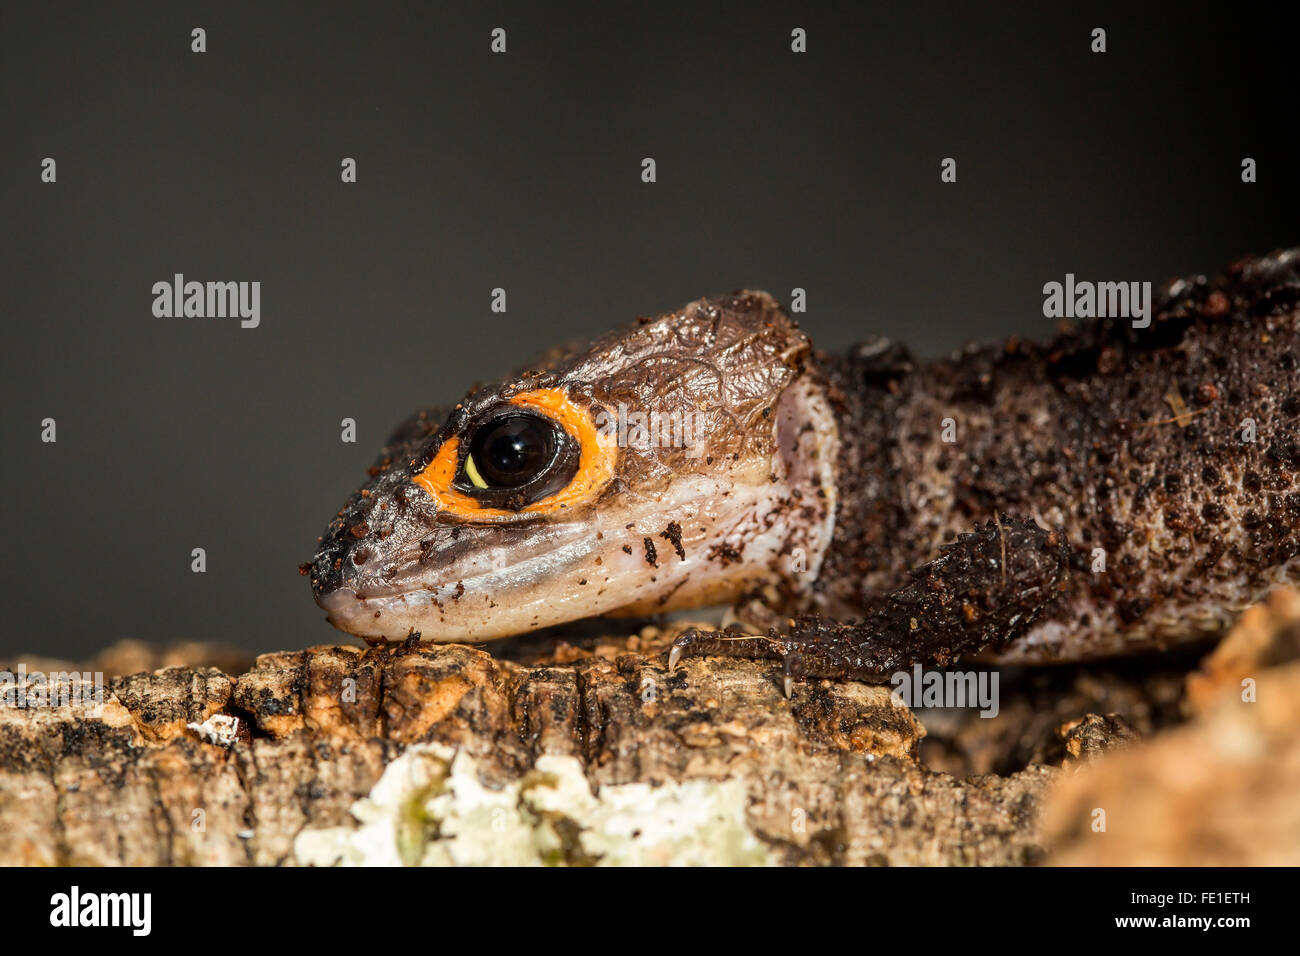 Lateral view of the head of a red eyed crocodile skink, Tribolonotus gracilis Stock Photo